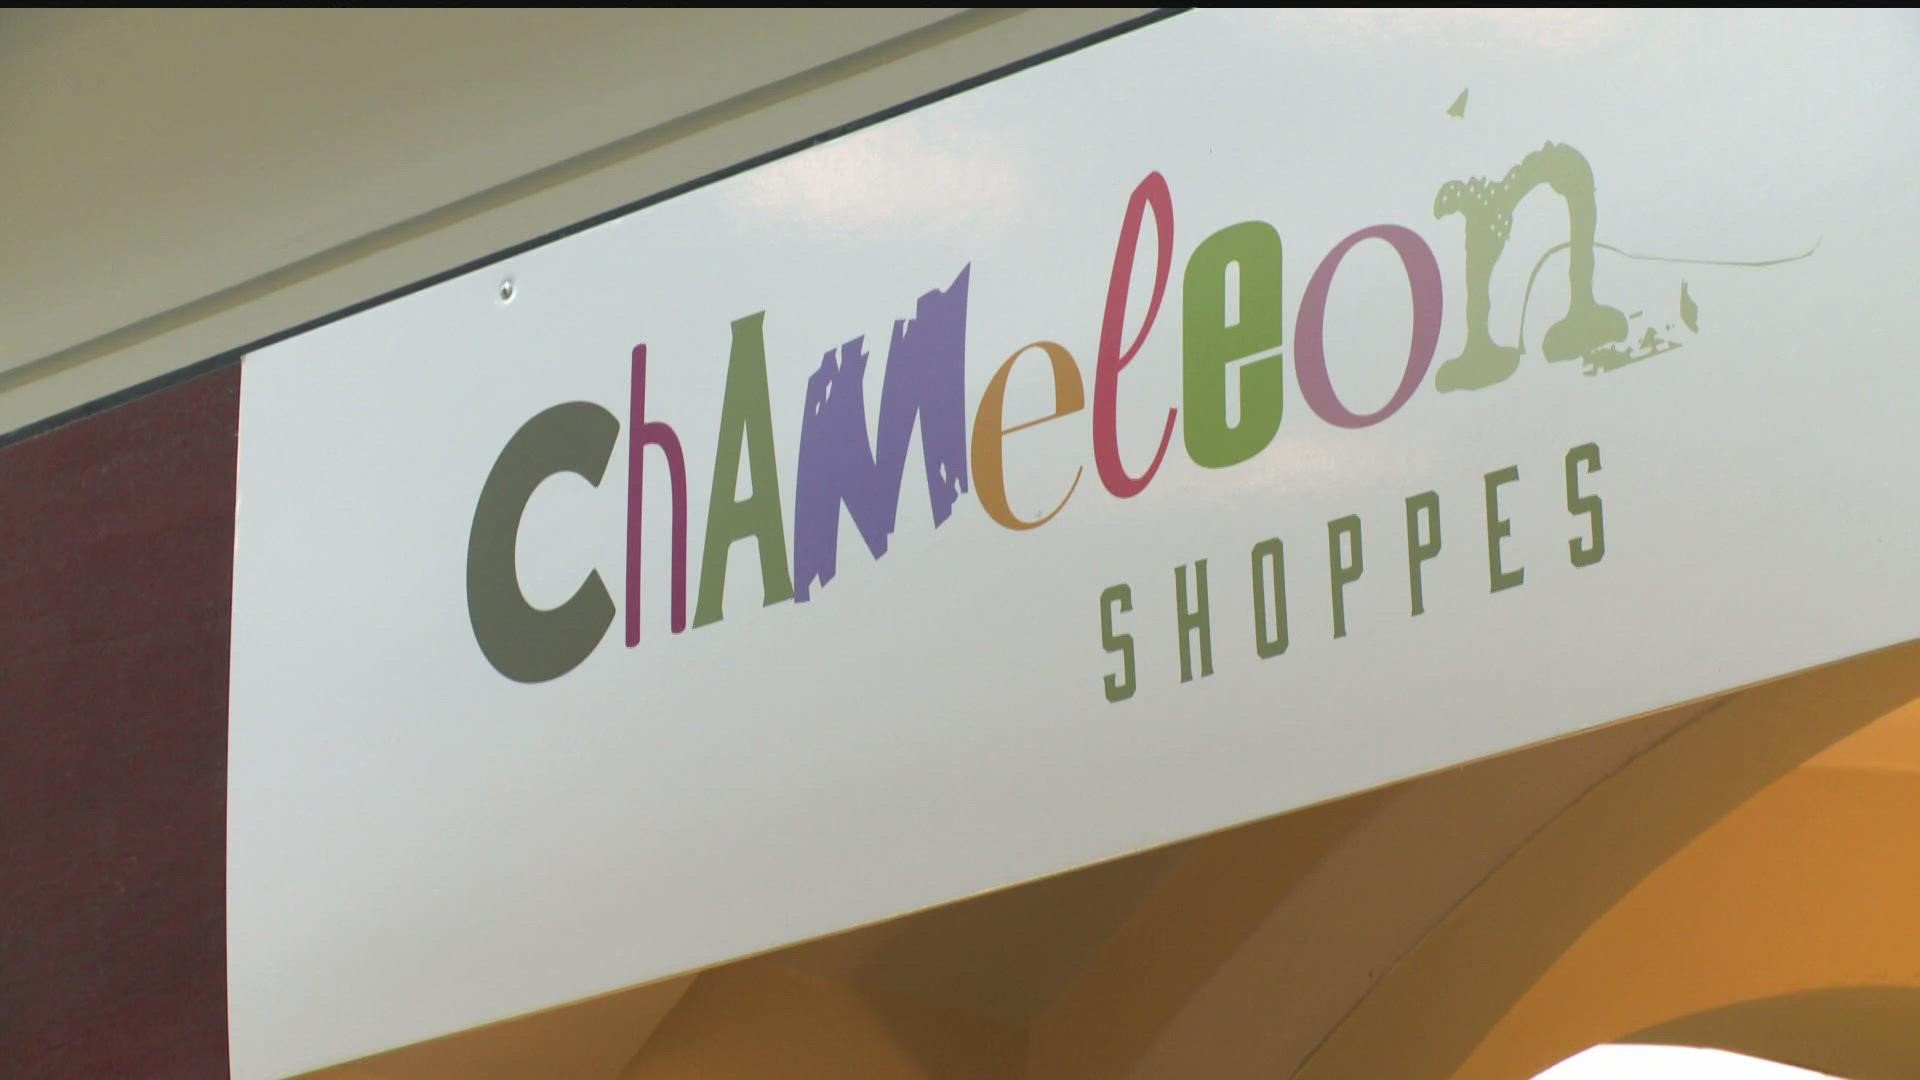 Chameleon Shoppes is partnering with the Latino Economic Development Center for Mercardo Latino to support BIPOC and women entrepreneurs.